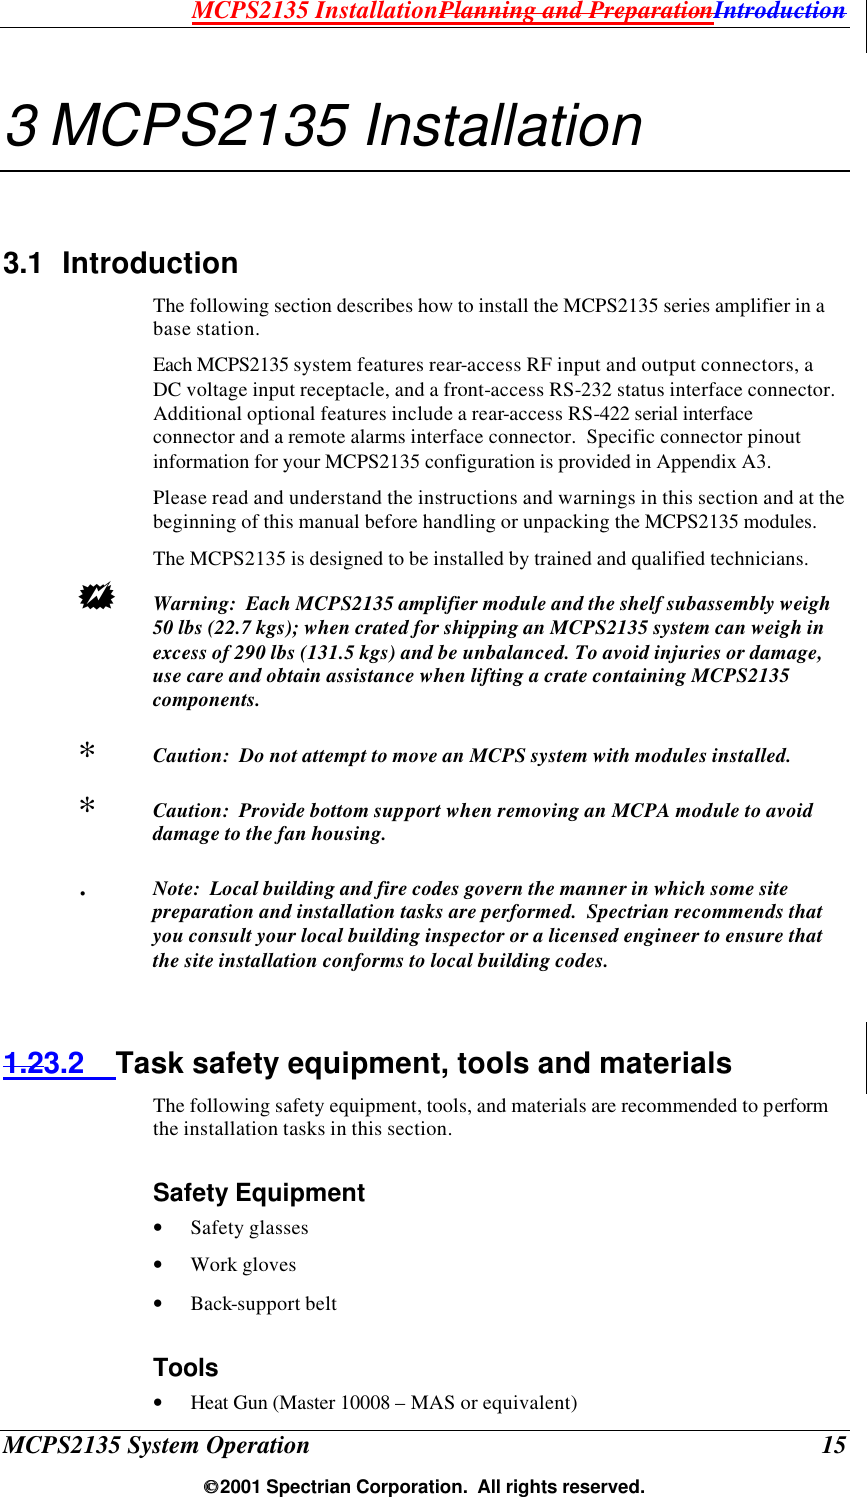 MCPS2135 InstallationPlanning and PreparationIntroduction MCPS2135 System Operation  15  2001 Spectrian Corporation.  All rights reserved. 3 MCPS2135 Installation 3.1 Introduction The following section describes how to install the MCPS2135 series amplifier in a base station. Each MCPS2135 system features rear-access RF input and output connectors, a DC voltage input receptacle, and a front-access RS-232 status interface connector.  Additional optional features include a rear-access RS-422 serial interface connector and a remote alarms interface connector.  Specific connector pinout information for your MCPS2135 configuration is provided in Appendix A3. Please read and understand the instructions and warnings in this section and at the beginning of this manual before handling or unpacking the MCPS2135 modules. The MCPS2135 is designed to be installed by trained and qualified technicians.  +  Warning:  Each MCPS2135 amplifier module and the shelf subassembly weigh 50 lbs (22.7 kgs); when crated for shipping an MCPS2135 system can weigh in excess of 290 lbs (131.5 kgs) and be unbalanced. To avoid injuries or damage, use care and obtain assistance when lifting a crate containing MCPS2135 components.  ∗  Caution:  Do not attempt to move an MCPS system with modules installed. ∗  Caution:  Provide bottom support when removing an MCPA module to avoid damage to the fan housing. .  Note:  Local building and fire codes govern the manner in which some site preparation and installation tasks are performed.  Spectrian recommends that you consult your local building inspector or a licensed engineer to ensure that the site installation conforms to local building codes.  1.23.2 Task safety equipment, tools and materials The following safety equipment, tools, and materials are recommended to perform the installation tasks in this section. Safety Equipment • Safety glasses • Work gloves • Back-support belt Tools • Heat Gun (Master 10008 – MAS or equivalent) 